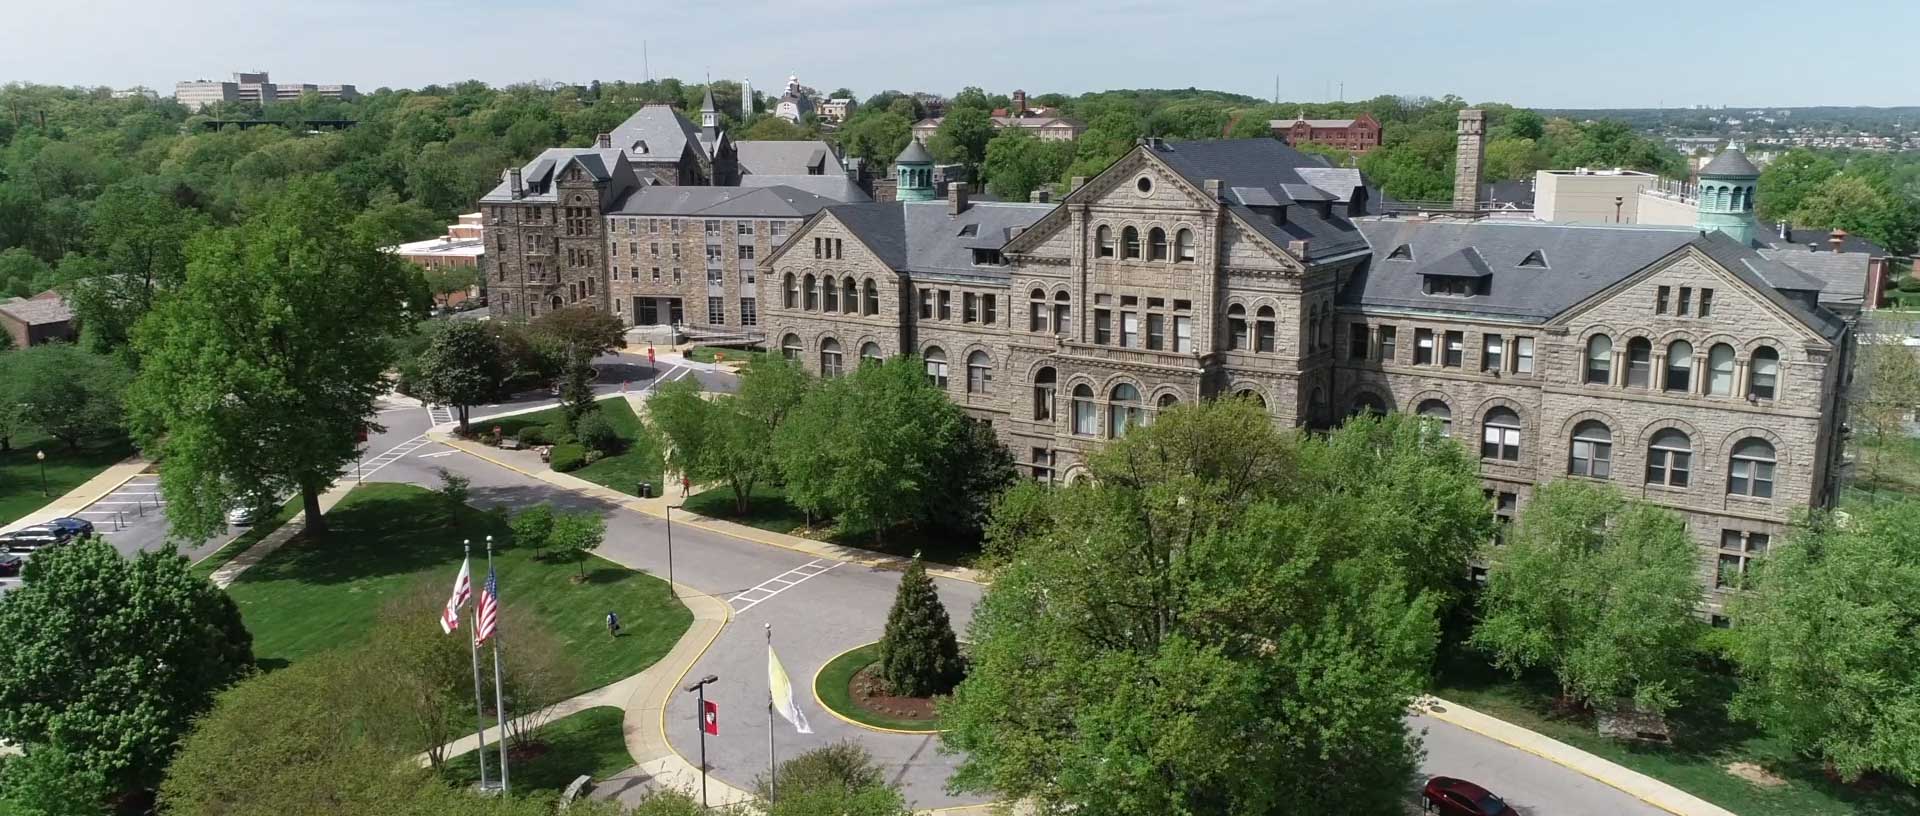 The Catholic University of America in Washington, D.C., Selects YuJa Video Platform and Panorama Digital Accessibility Platform to Serve Students Campuswide